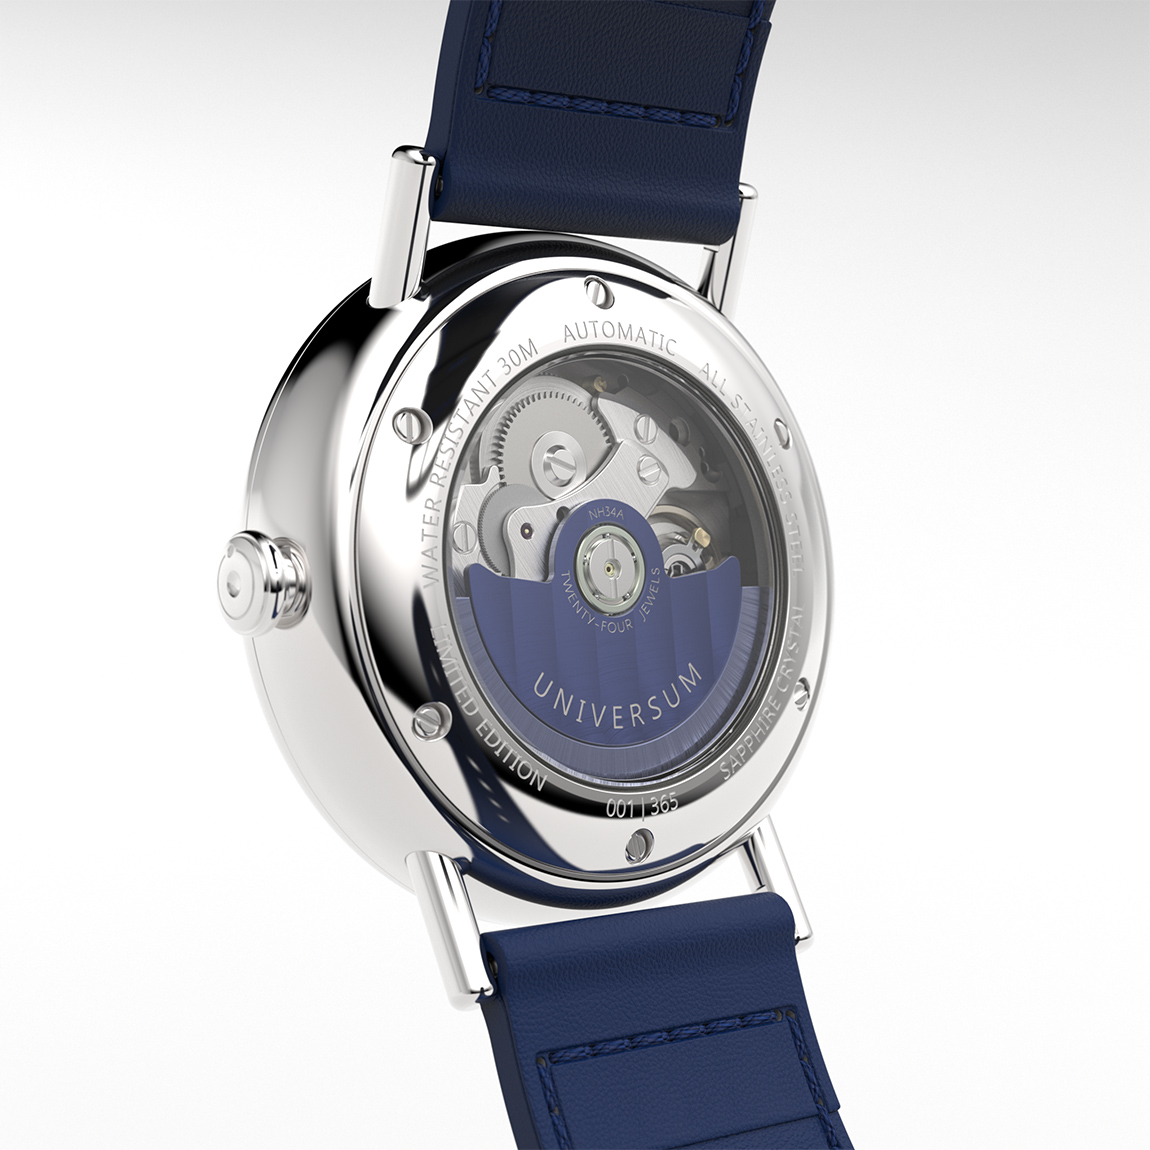 Watches by HVILINA - stories for your wrist